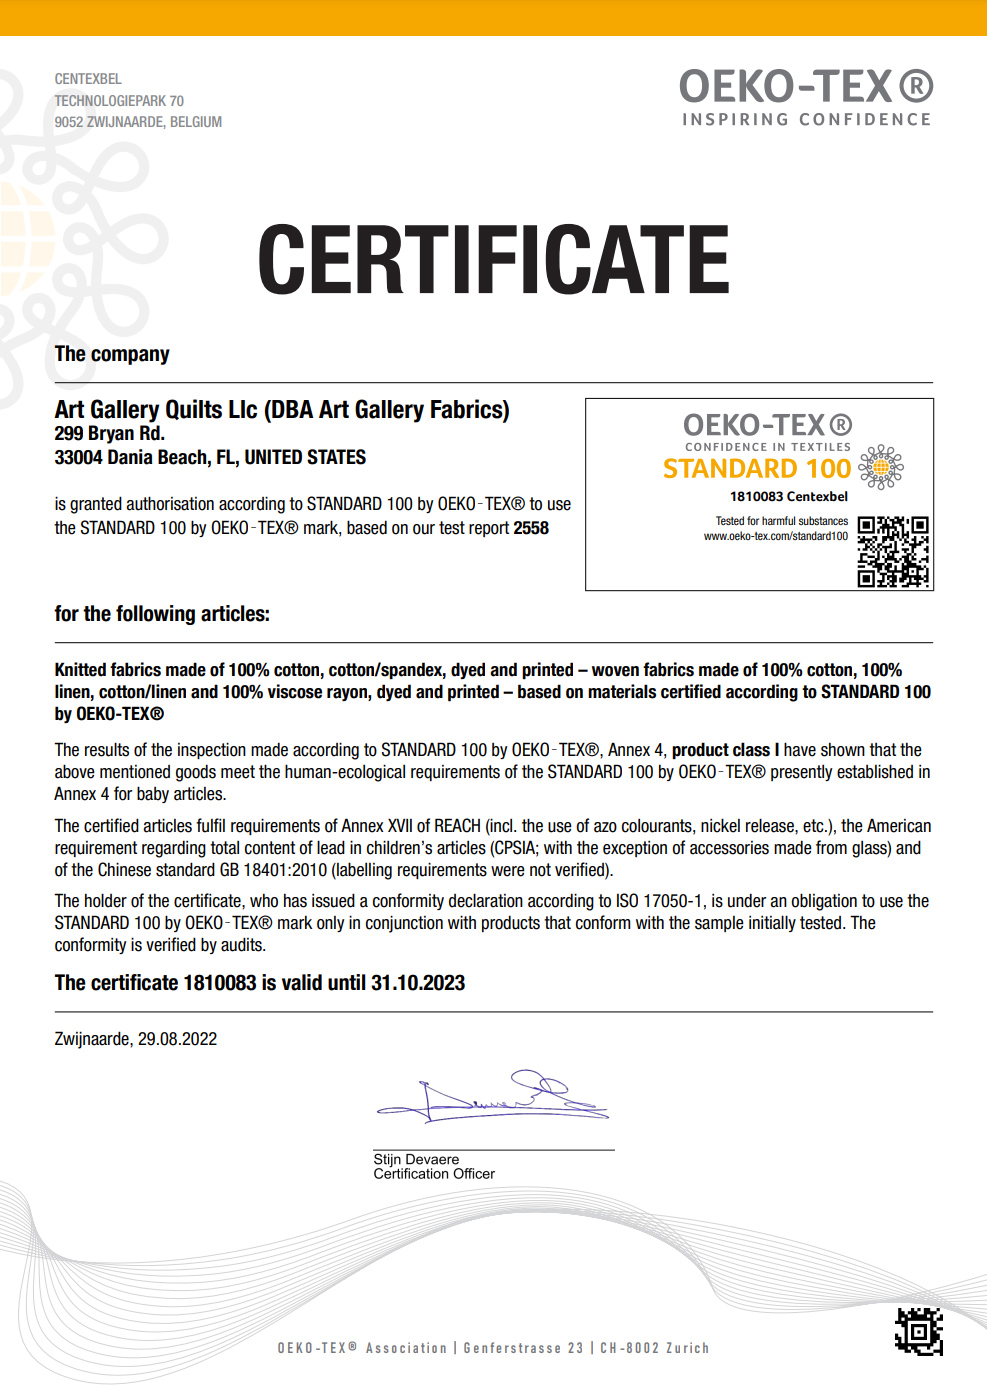 What is Oeko-Tex? Learn About This Textile Certification Standard